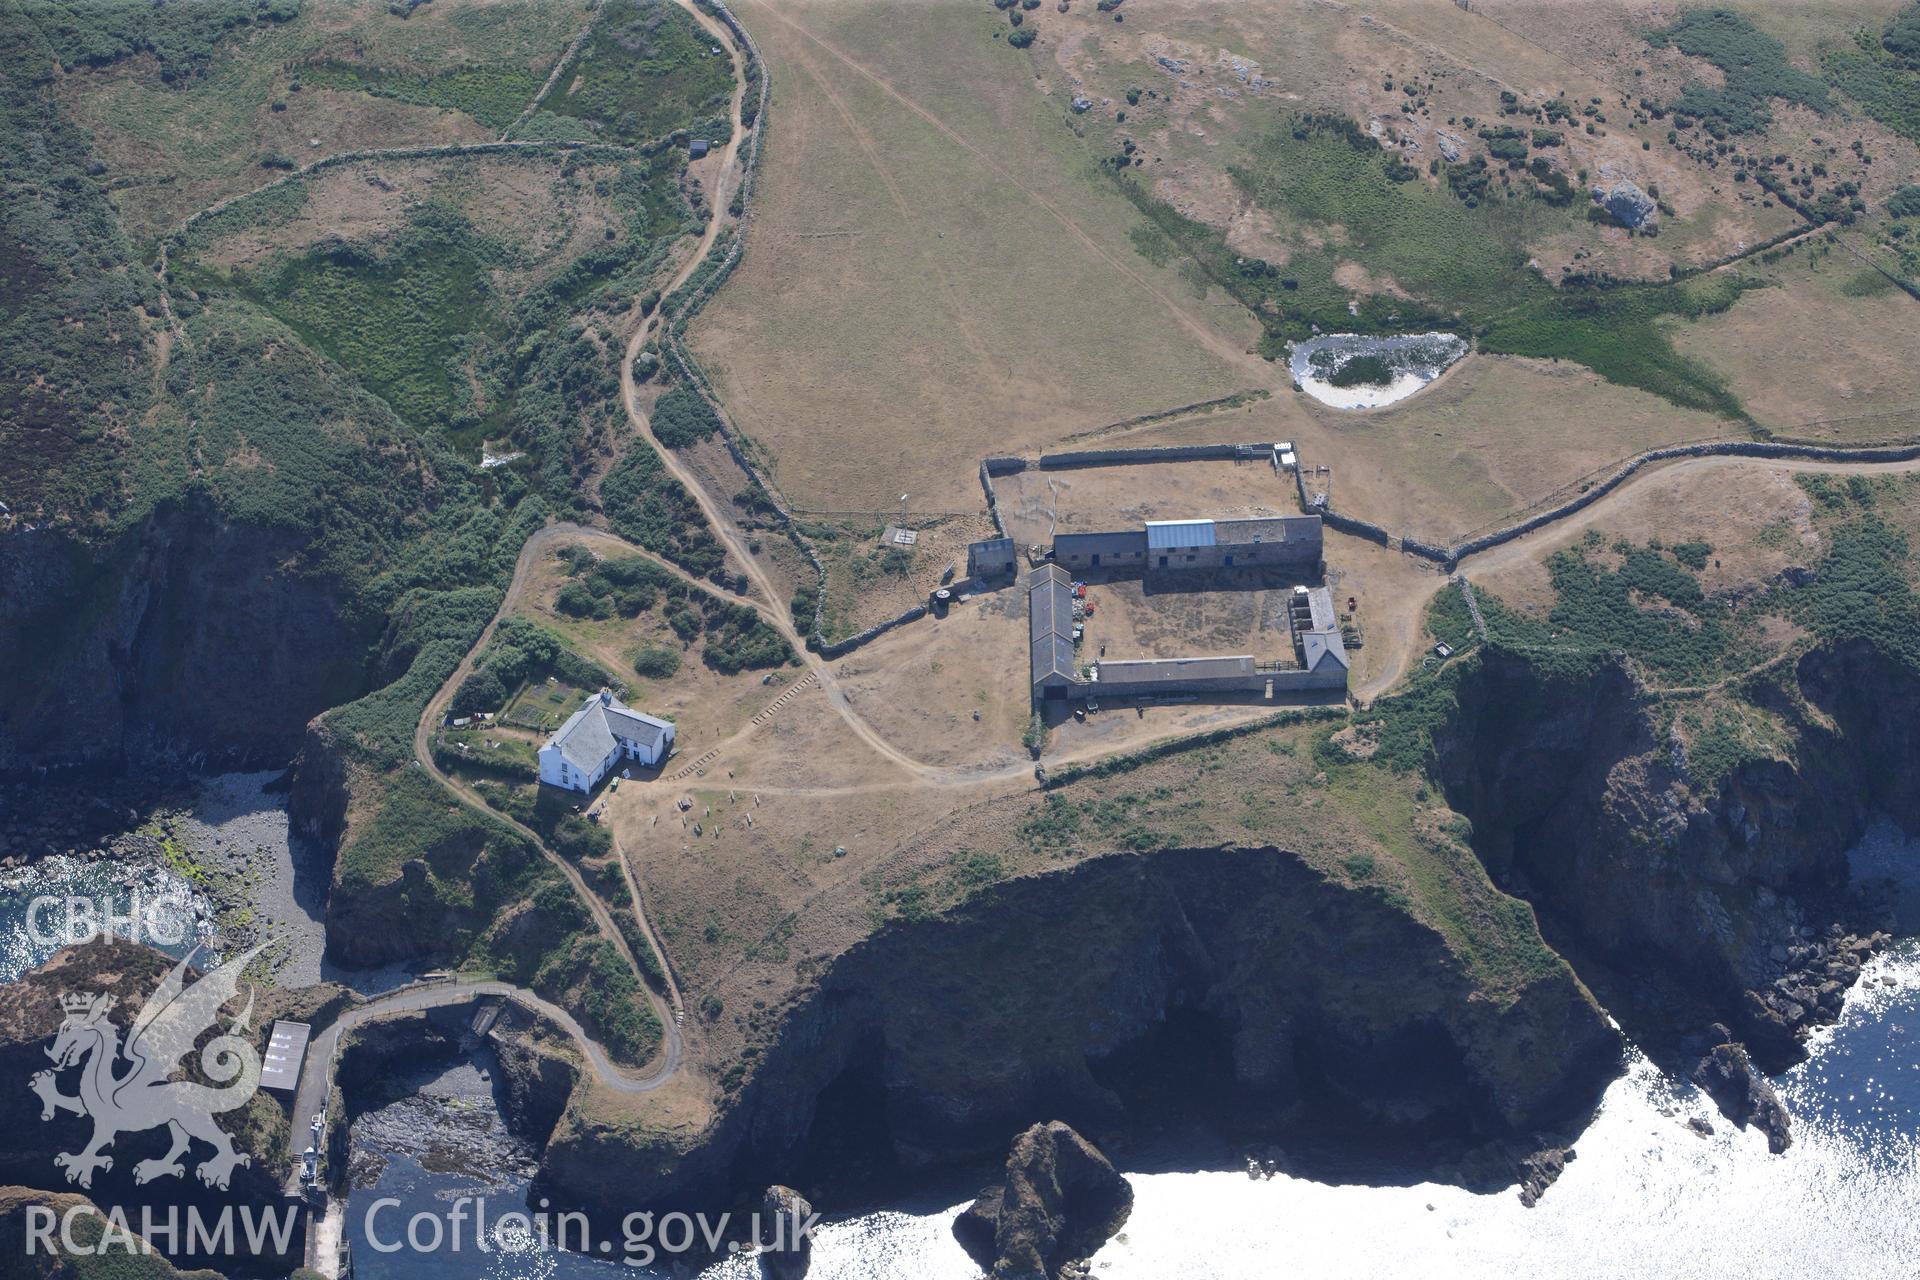 Ramsey Island Farm and pond, on Ramsey Island. Oblique aerial photograph taken during the Royal Commission?s programme of archaeological aerial reconnaissance by Toby Driver on 16th July 2013.